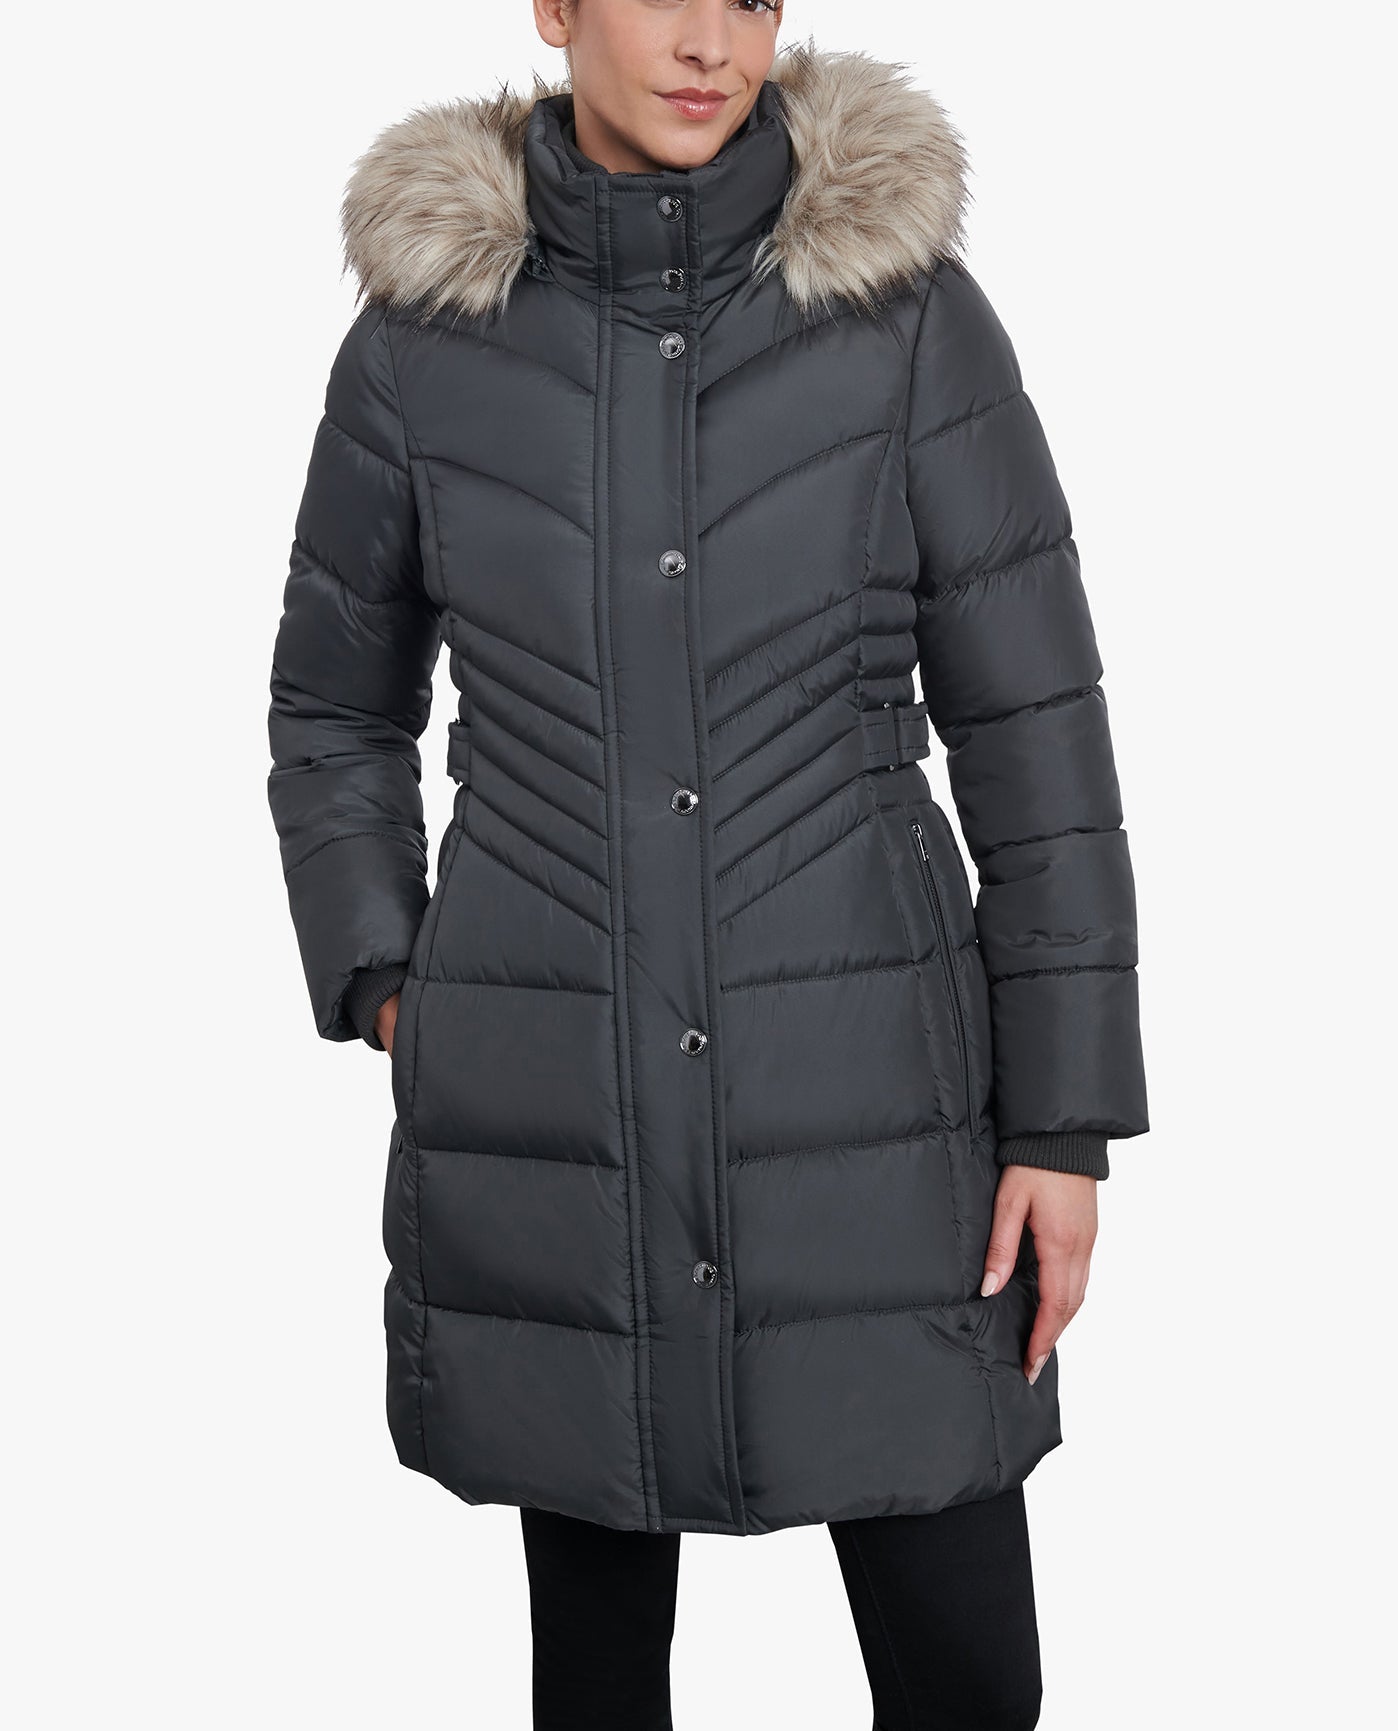 FRONT VIEW OF PLUS SIZE ZIP-FRONT LONG LENGTH PUFFER JACKET WITH ZIP-OFF FUR TRIM HOOD | GUNMETAL